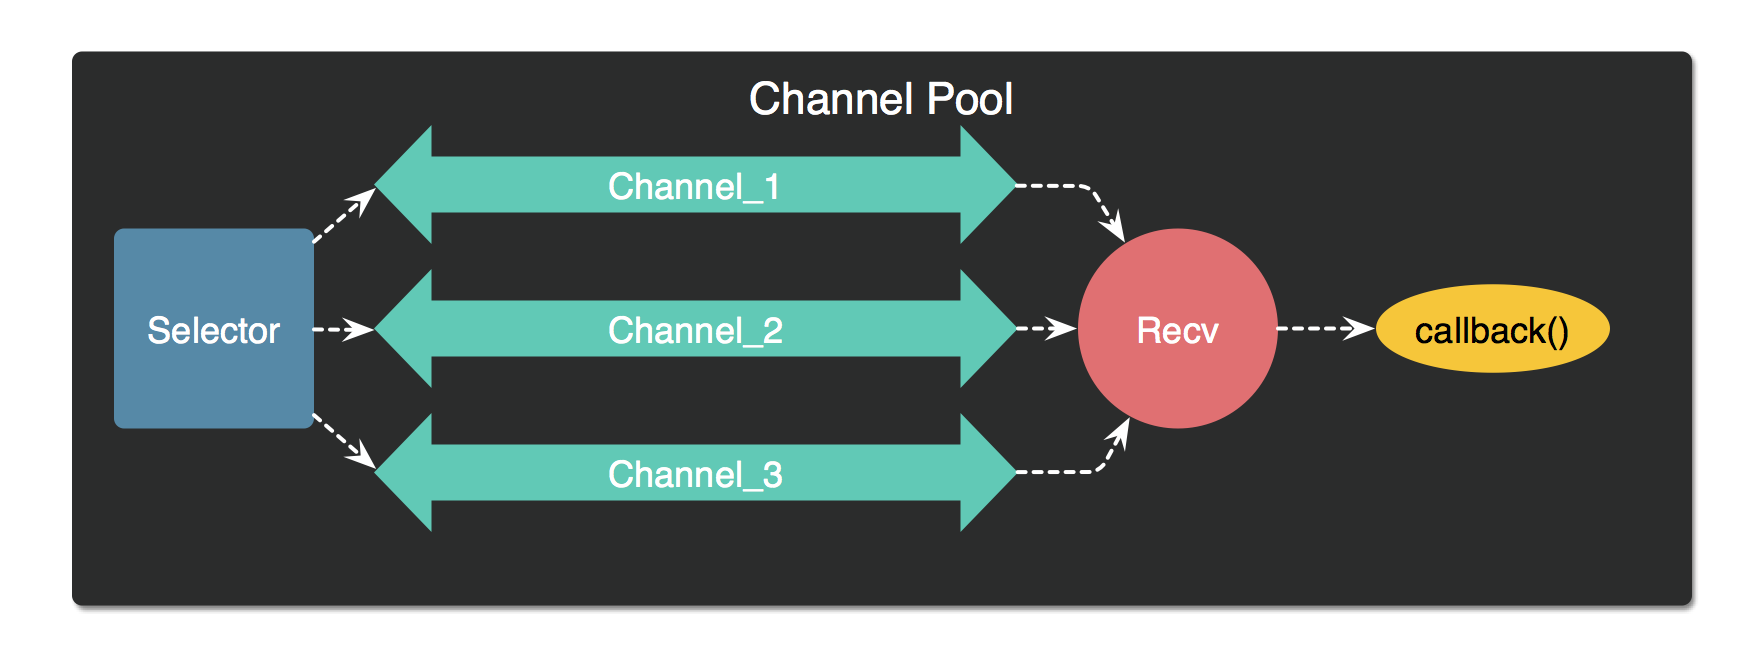 channel pool